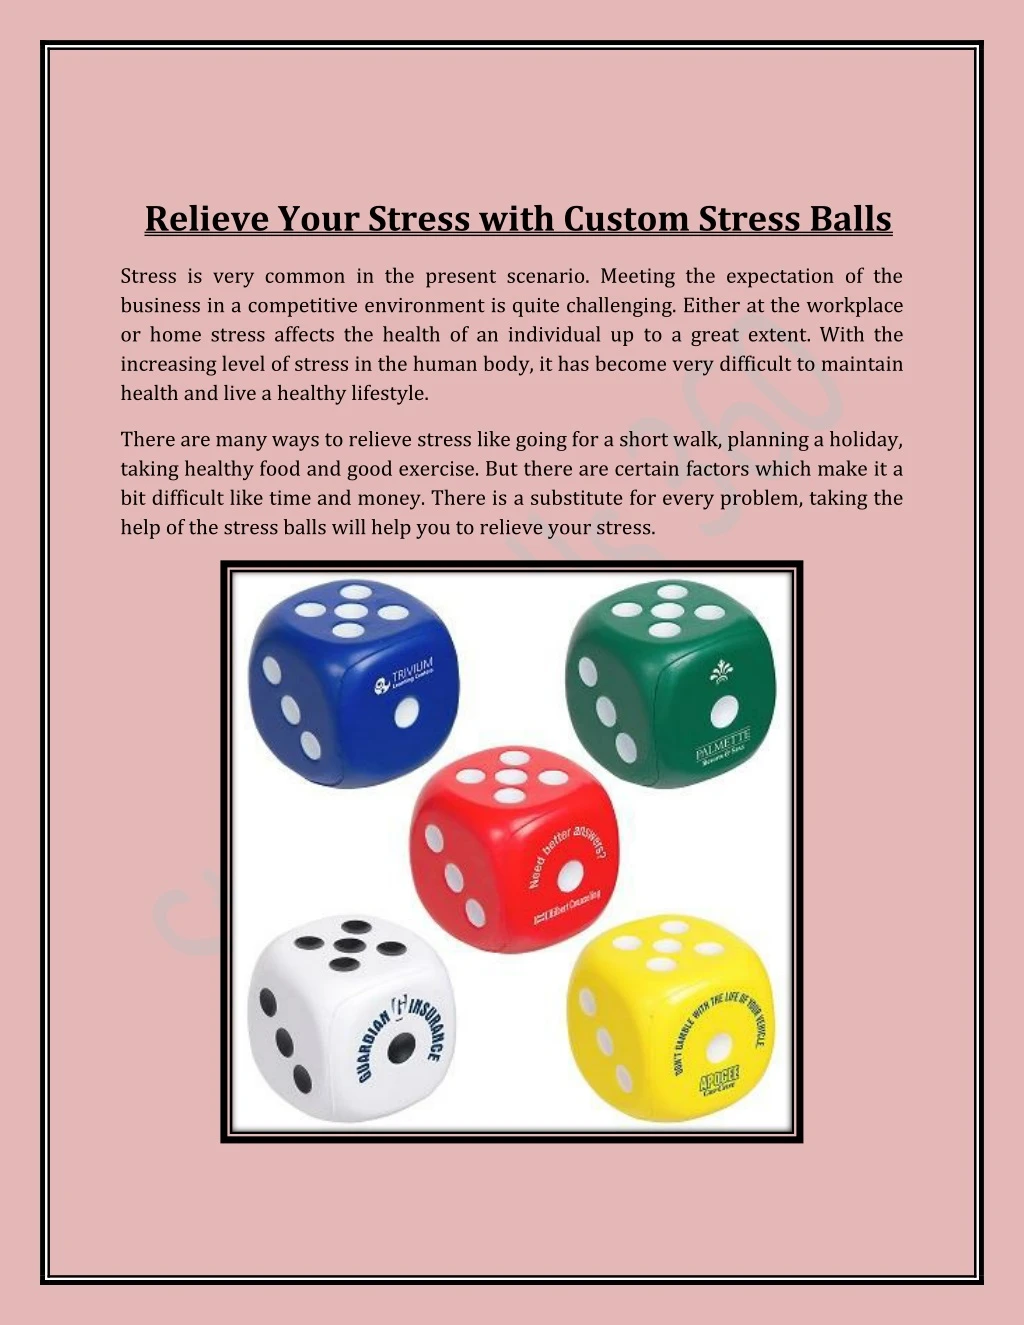 relieve your stress with custom stress balls